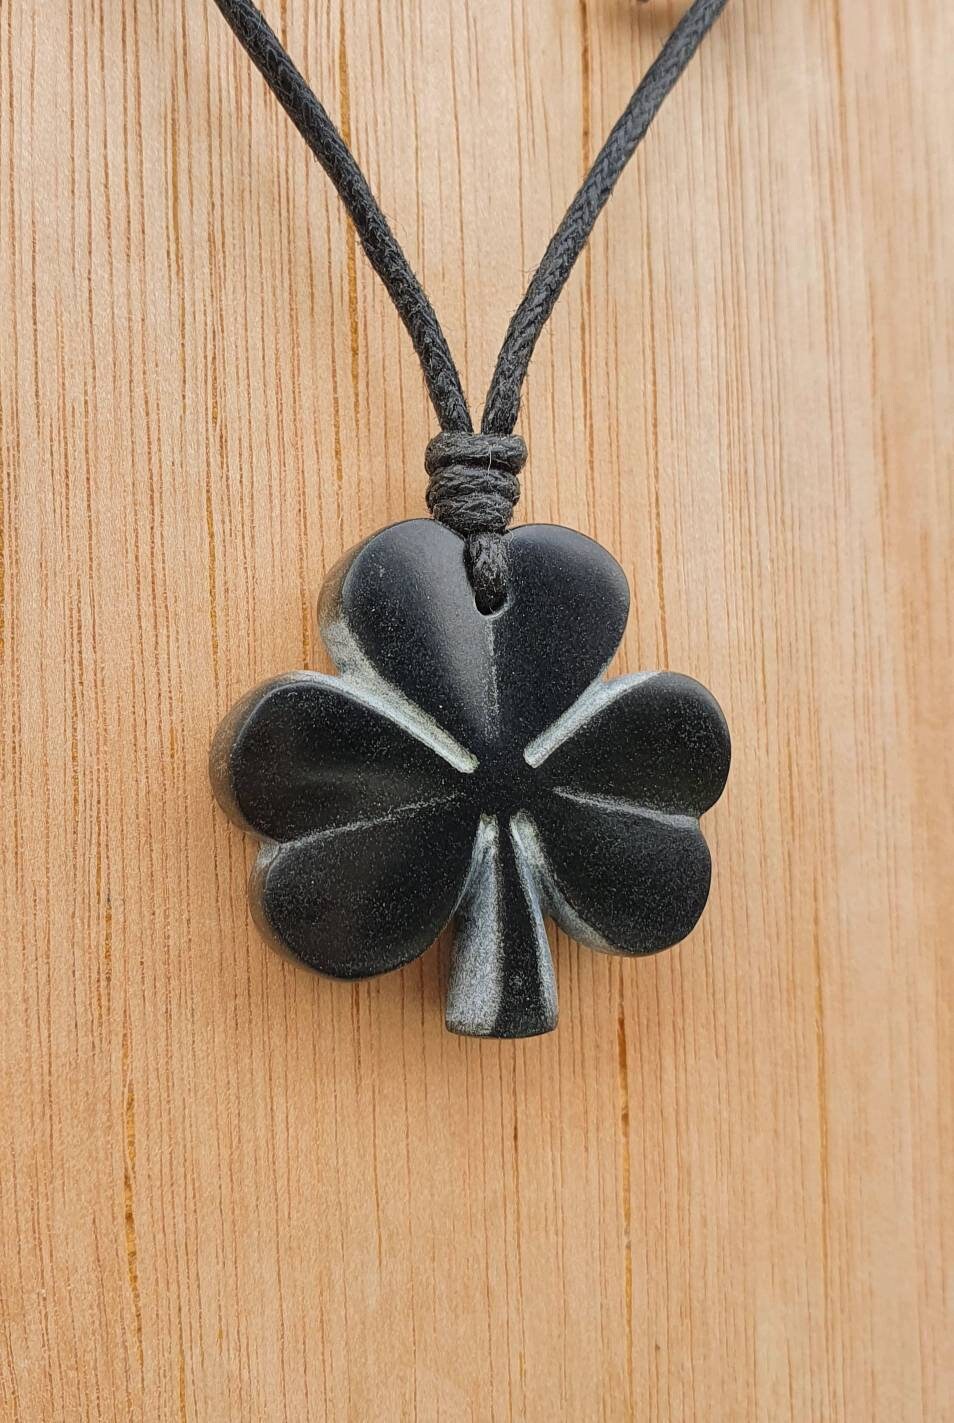 Fashionable and Popular Men Clover Charm Necklace Alloy for Jewelry Gift  and for a Stylish Look | SHEIN